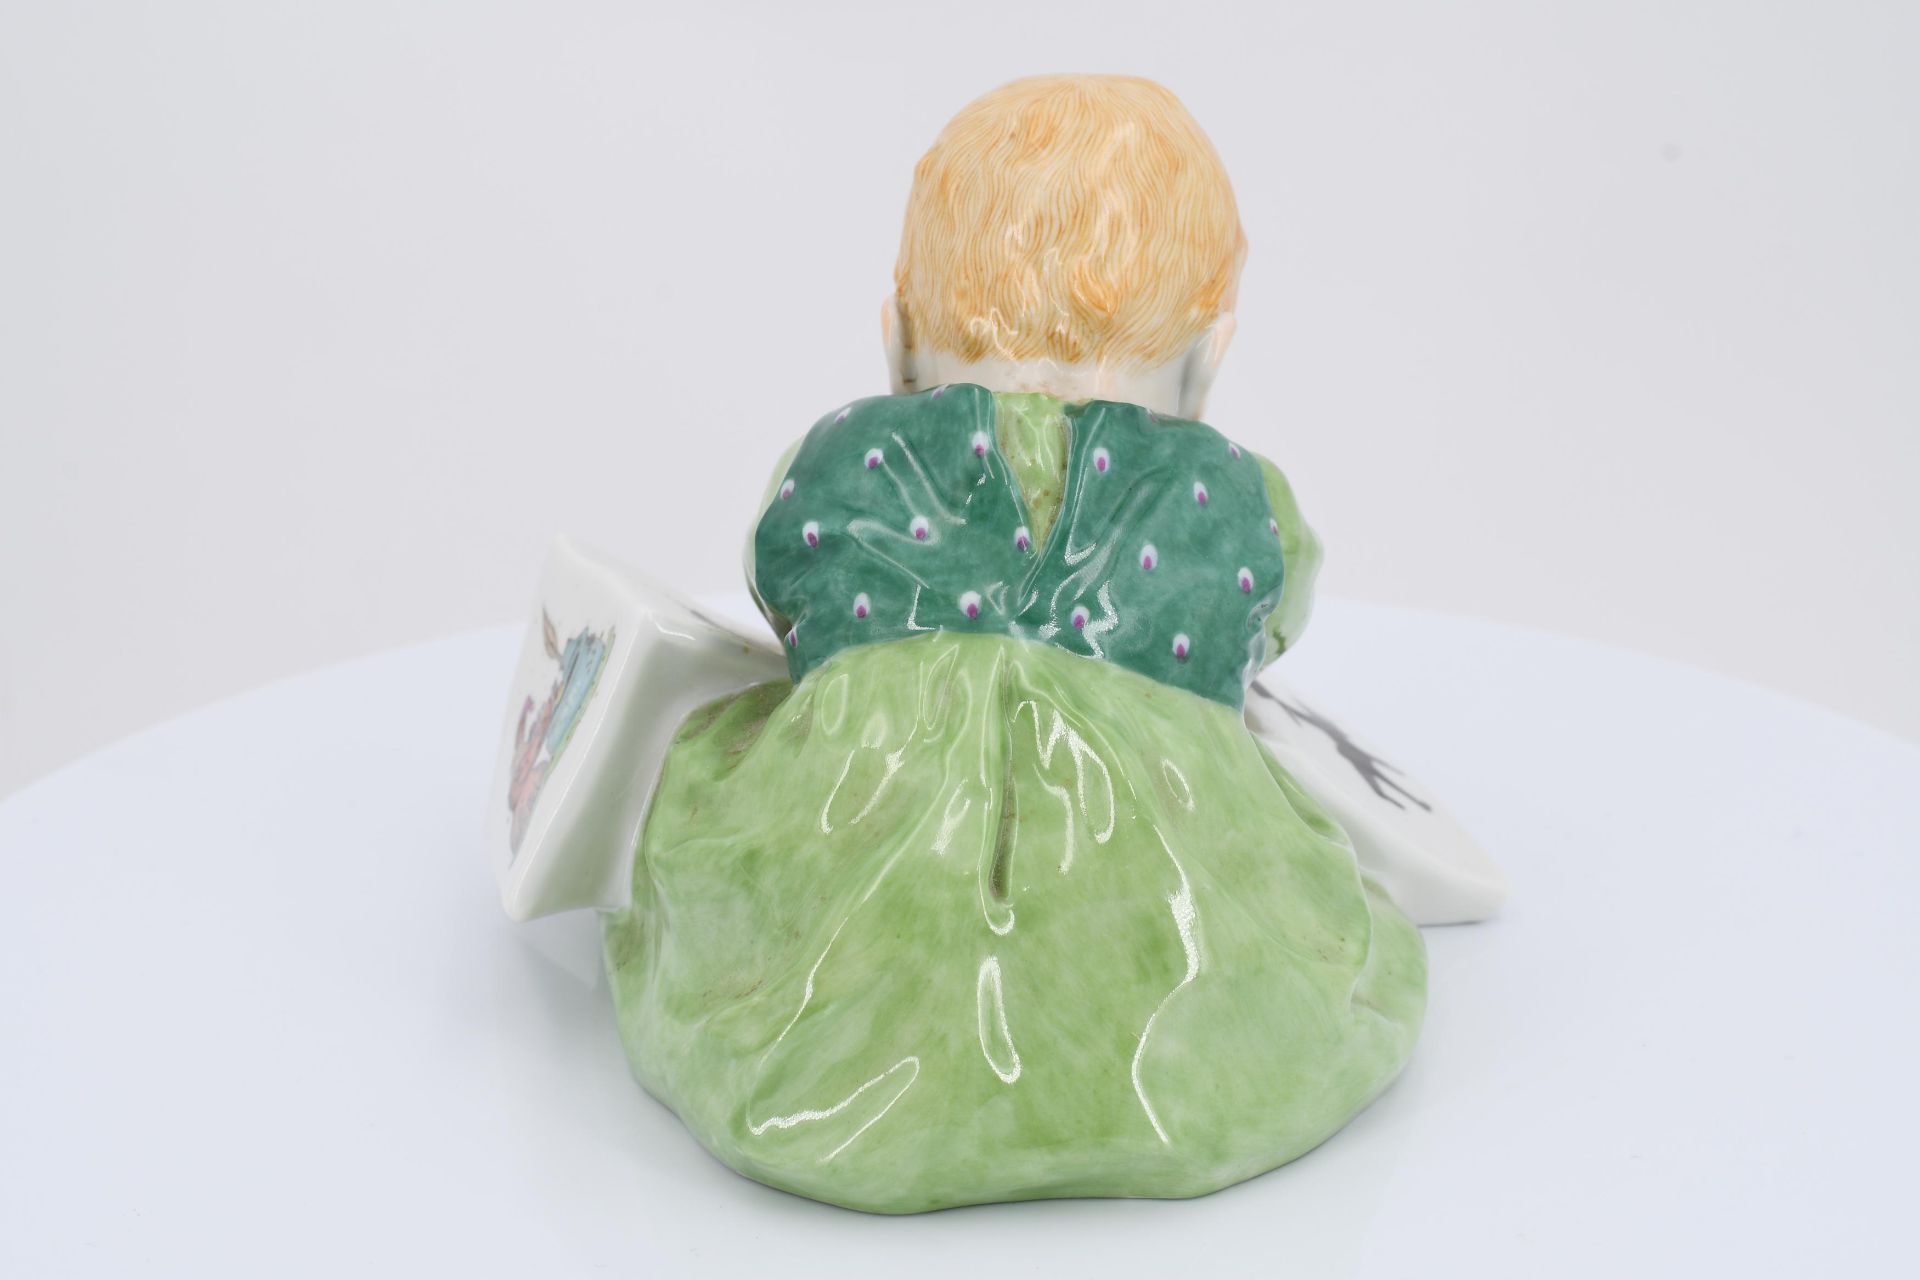 Porcelain figurine of child with storybook - Image 4 of 6